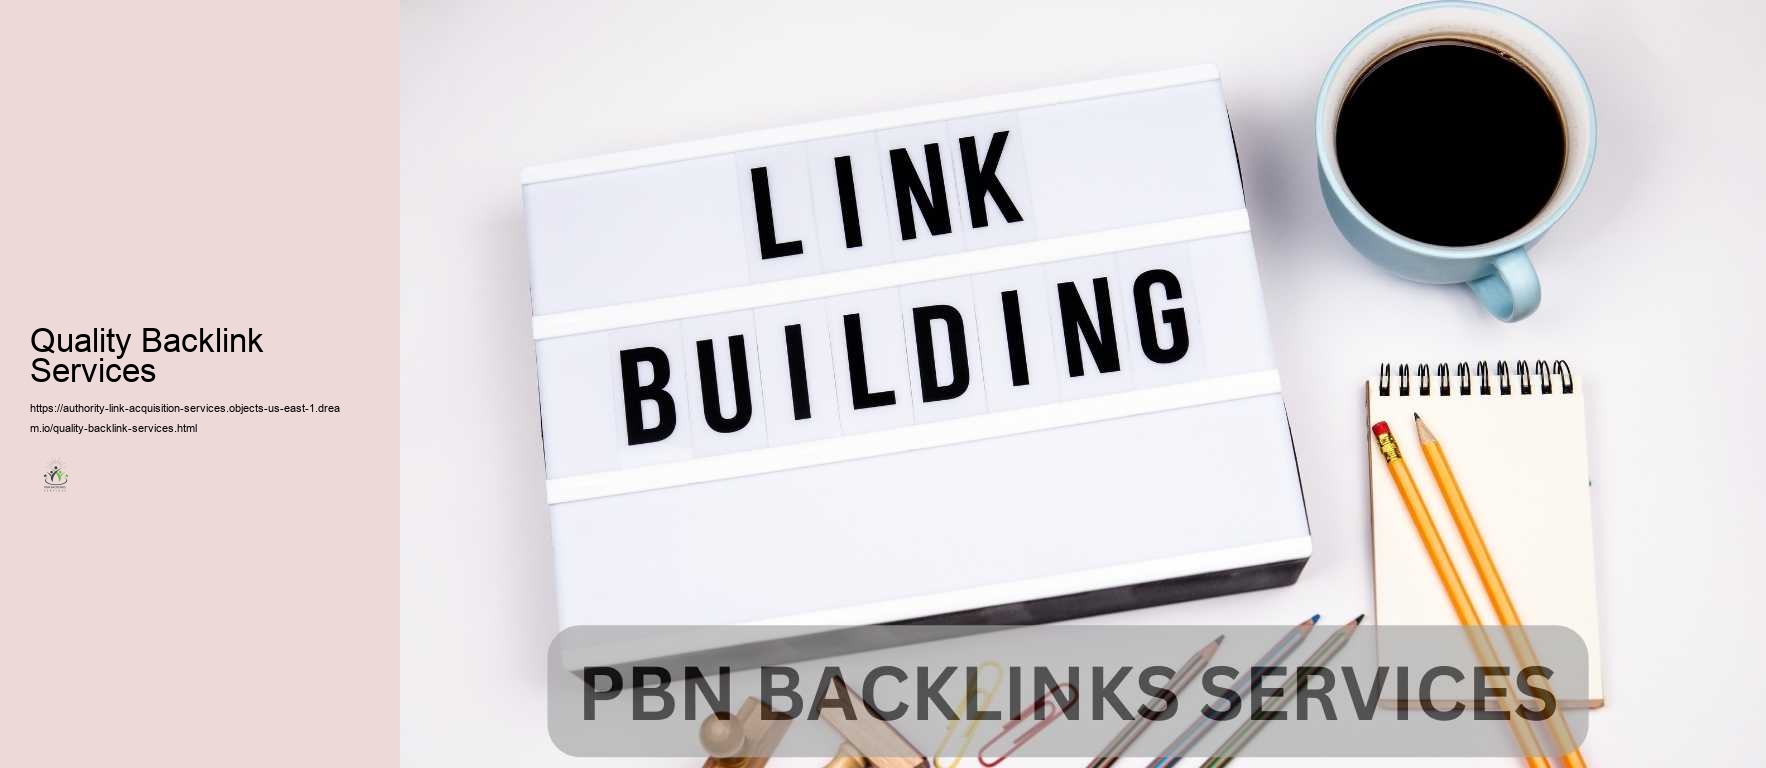 Quality Backlink Services